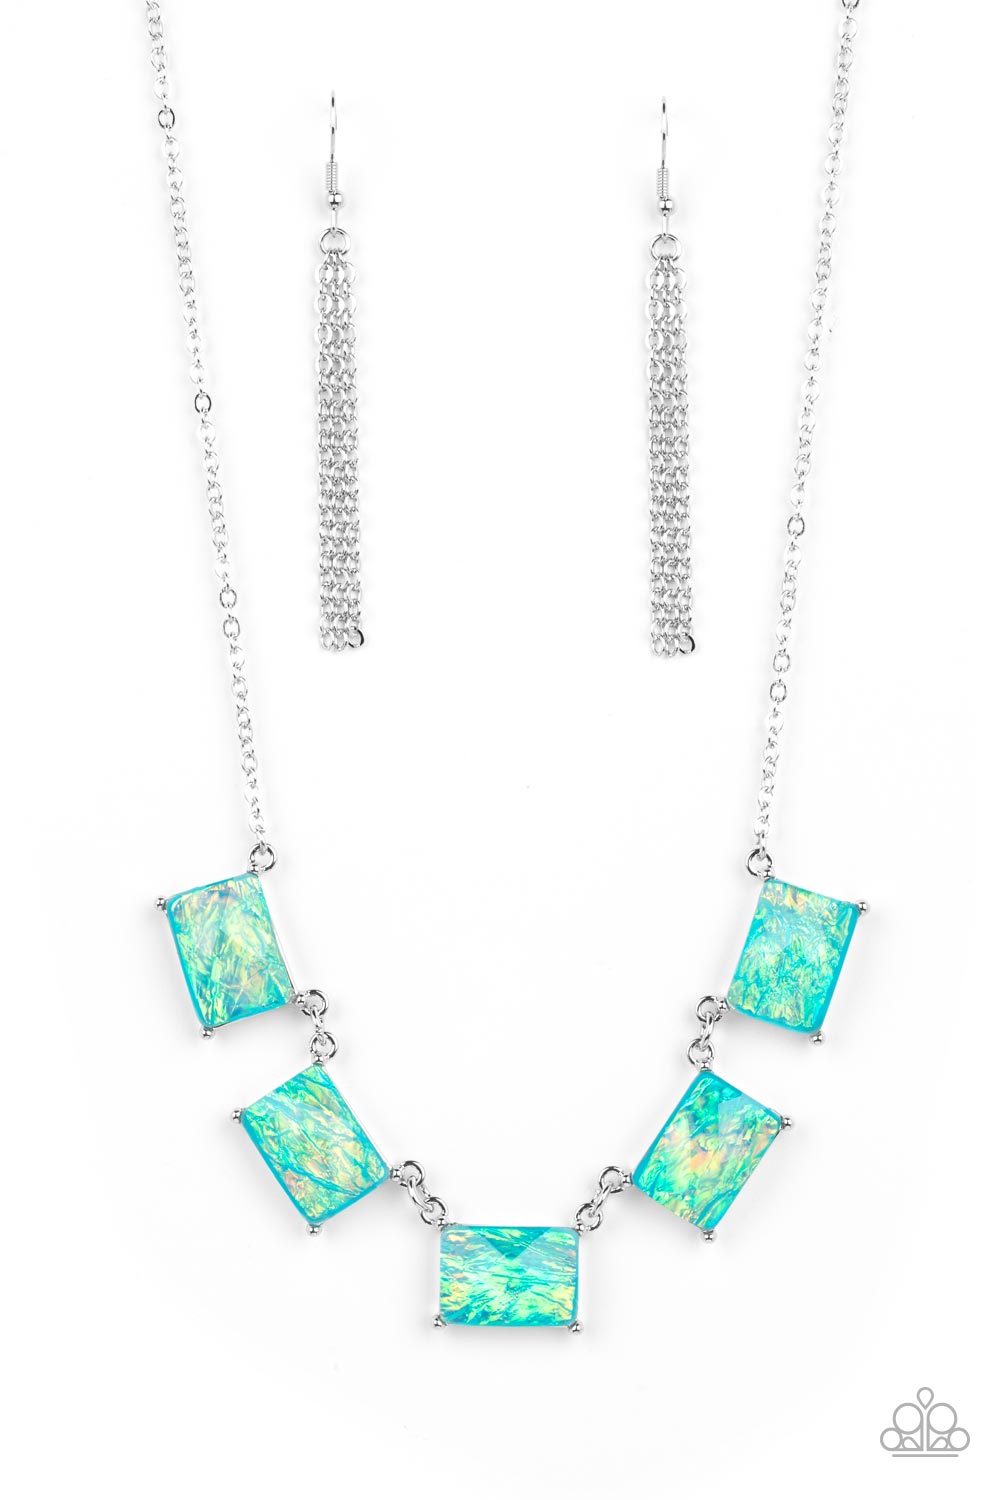 Opalescent Oblivion Blue Necklace - Paparazzi Accessories- lightbox - CarasShop.com - $5 Jewelry by Cara Jewels